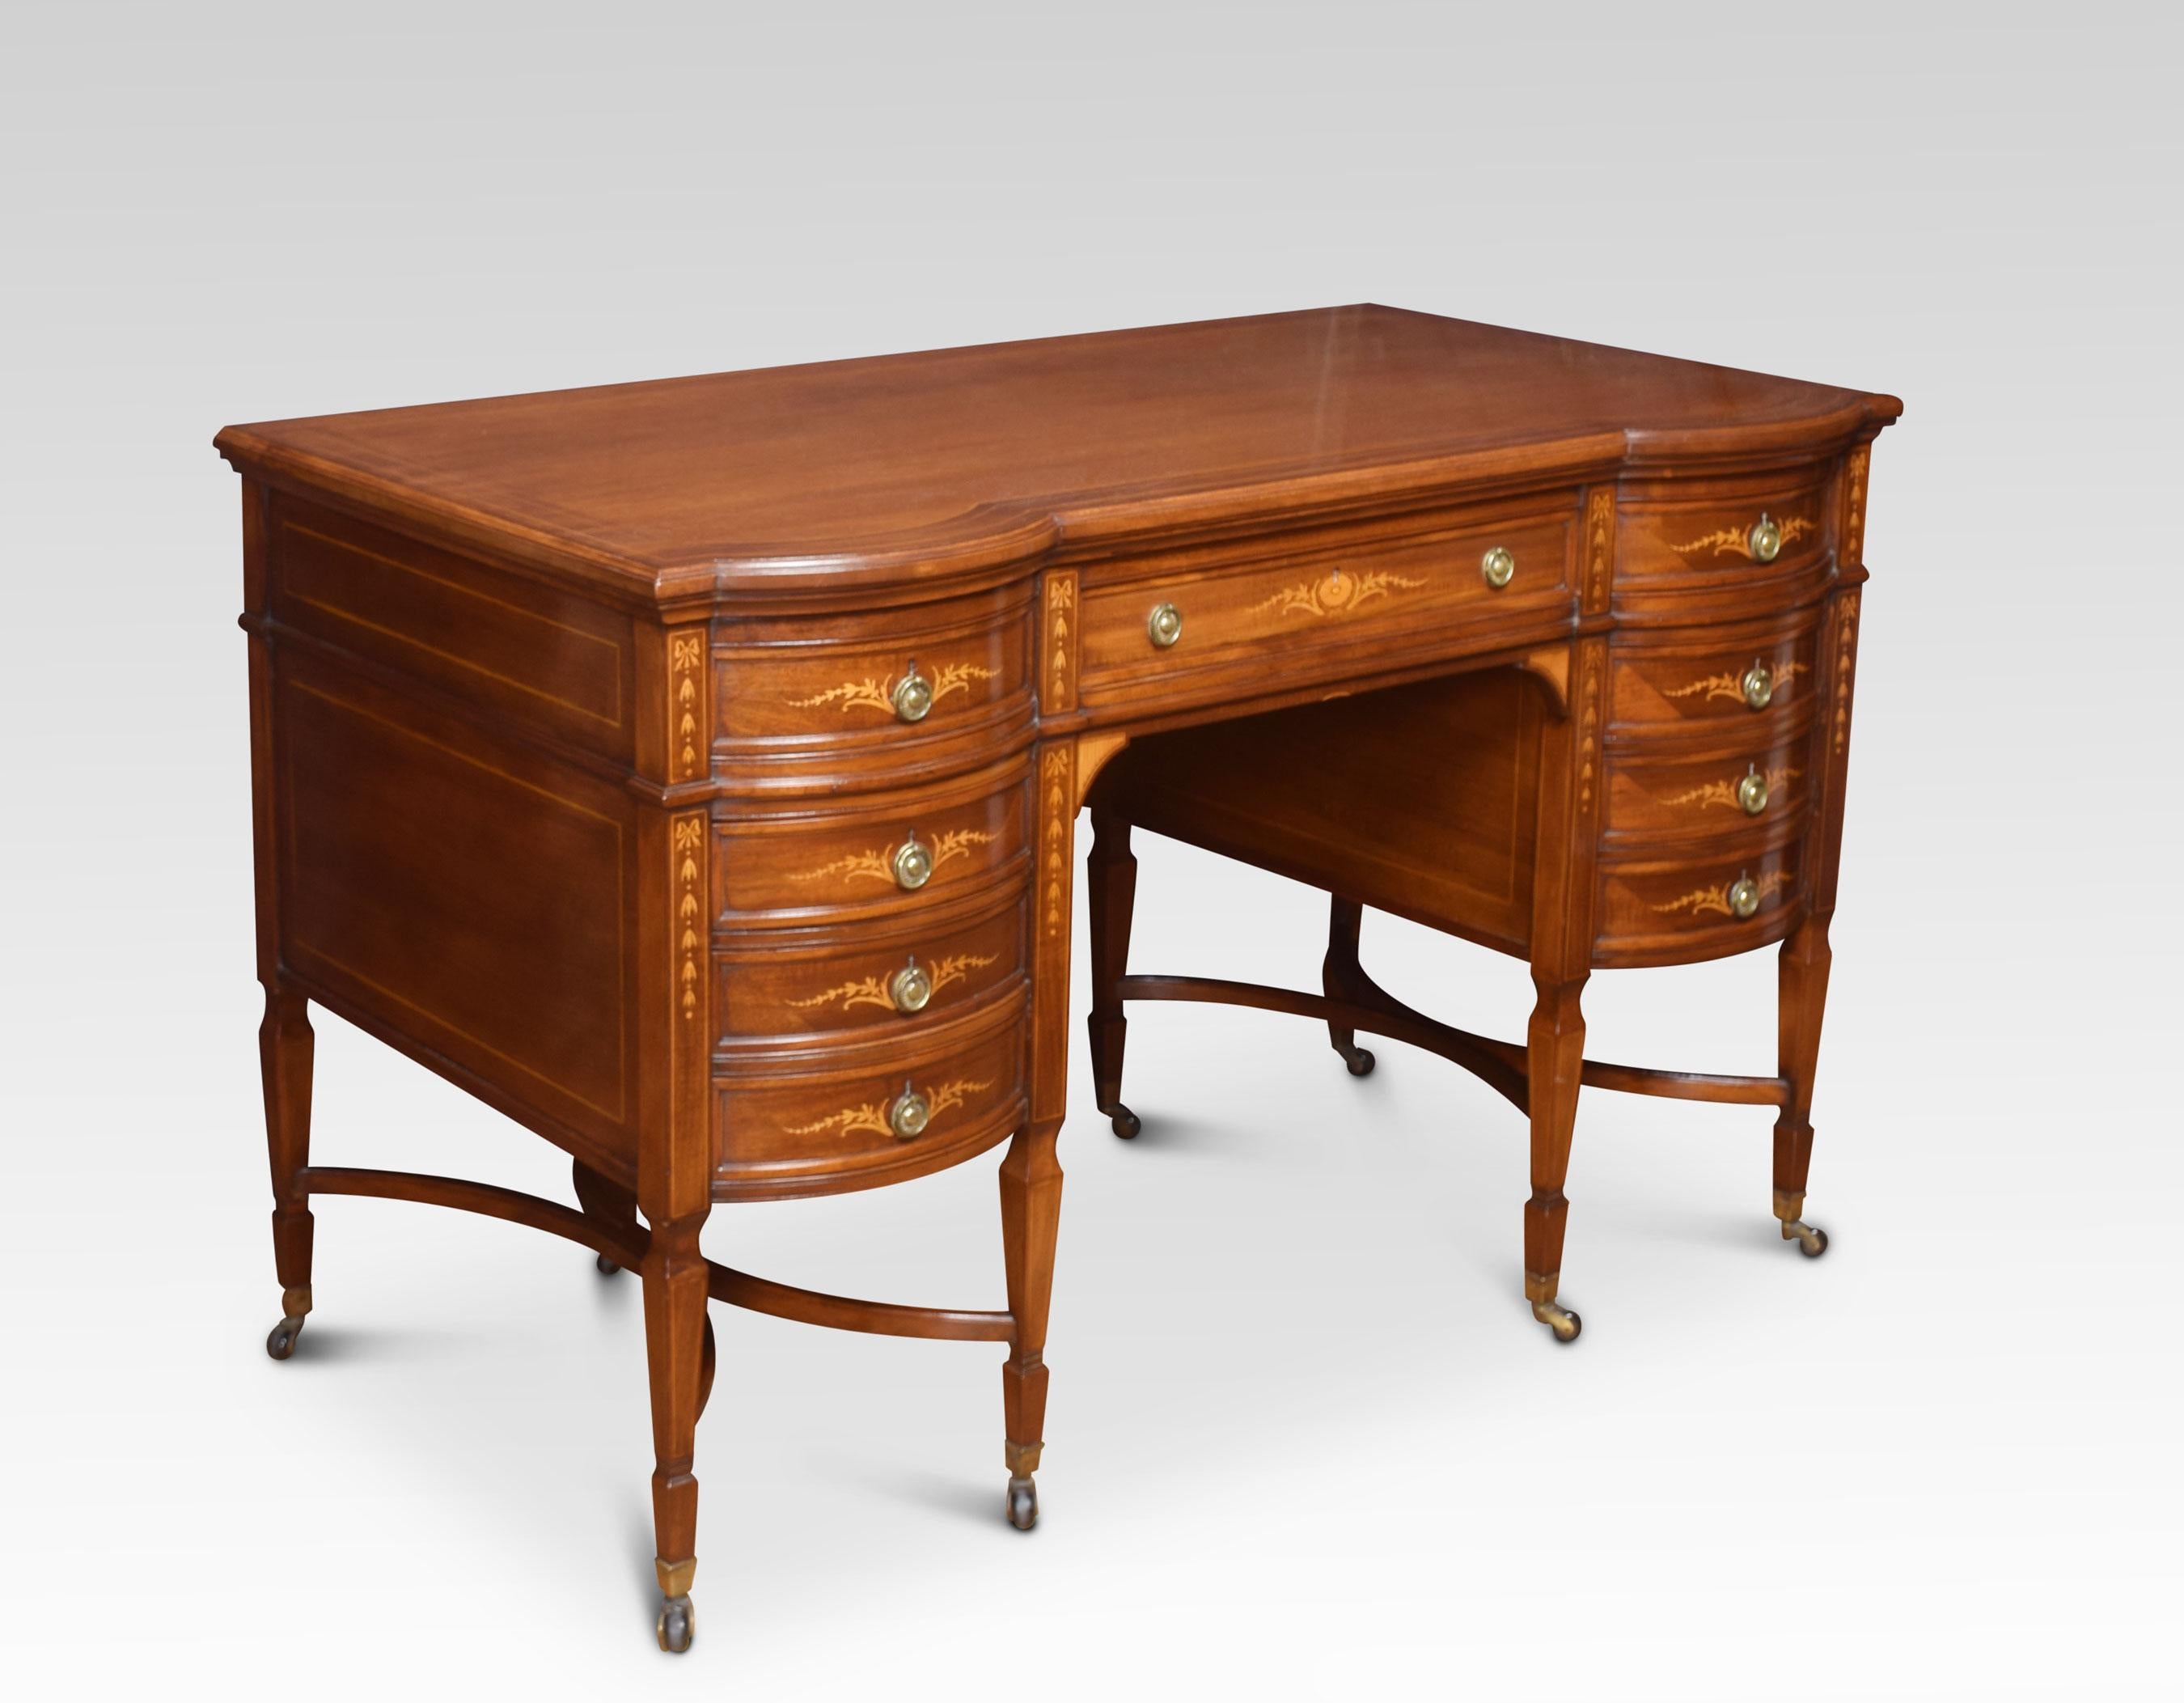 Mahogany inlaid dressing table the large rectangular top with line inlaid detail. Above central inlaid draw with floral swags and ribbons flanked by two banks of drawers to either side with similar inlay and tooled brass ring handles. All raised up